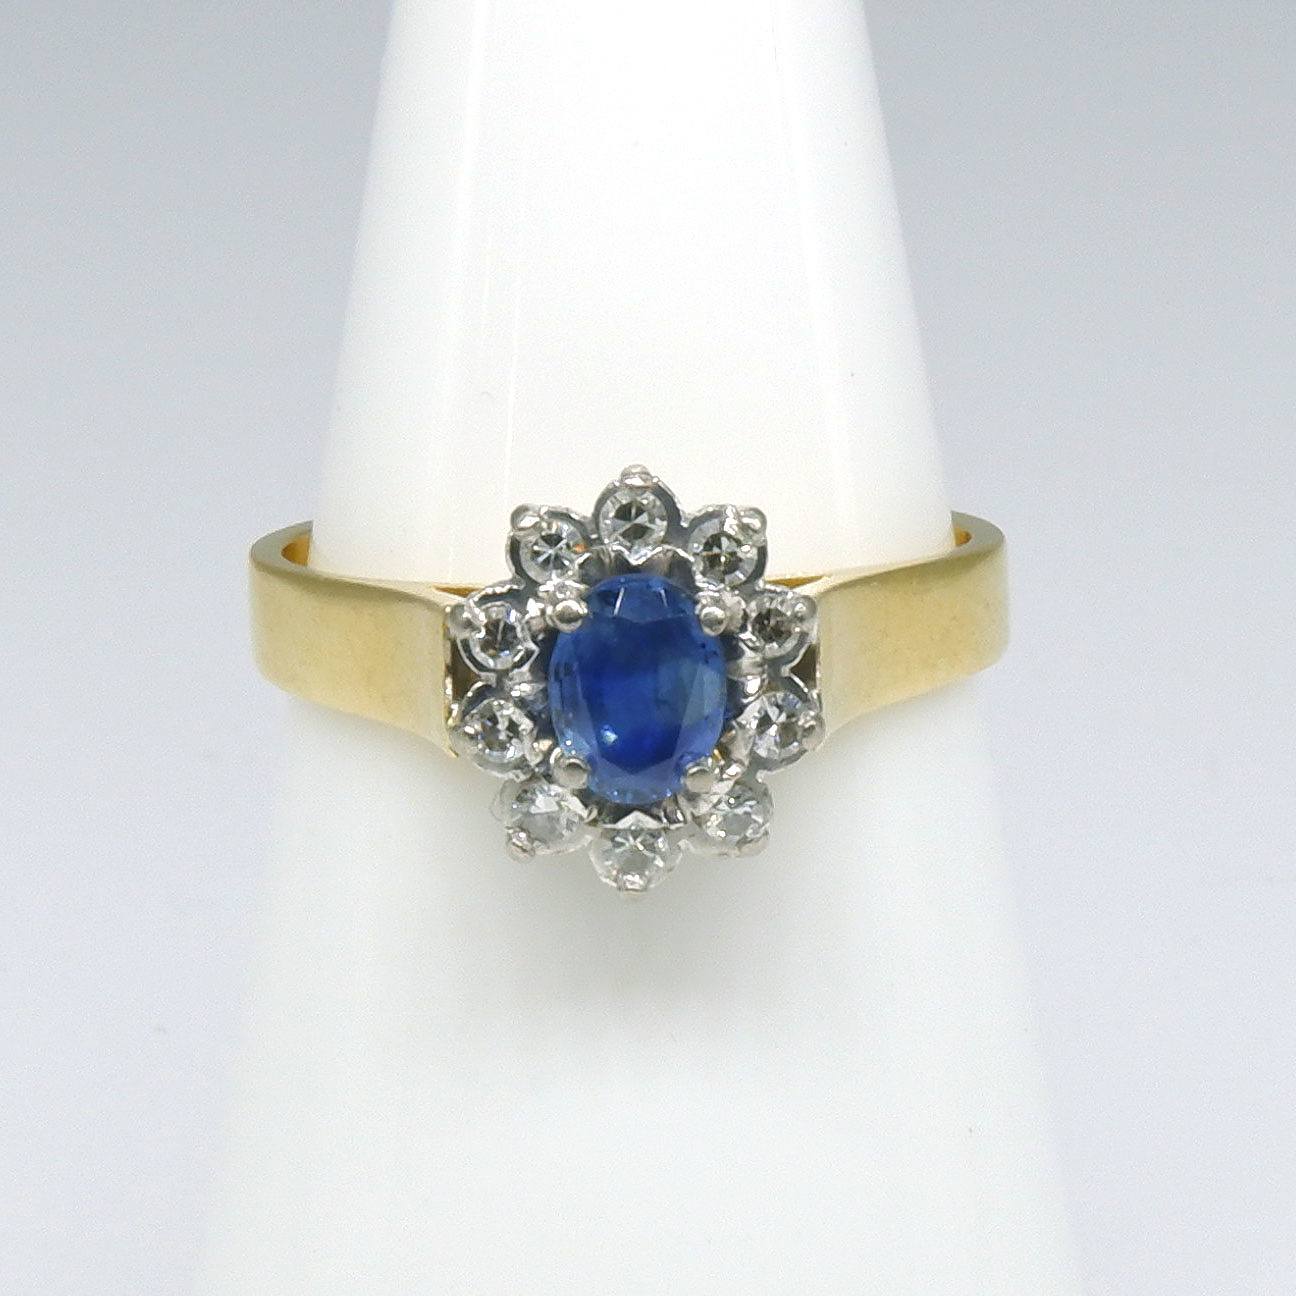 '18ct Yellow and White Gold Ring, Oval Cluster with Centre Medium Blue Ceylonese Type Sapphire and Ten Single Cut Diamonds in Claw Setting'